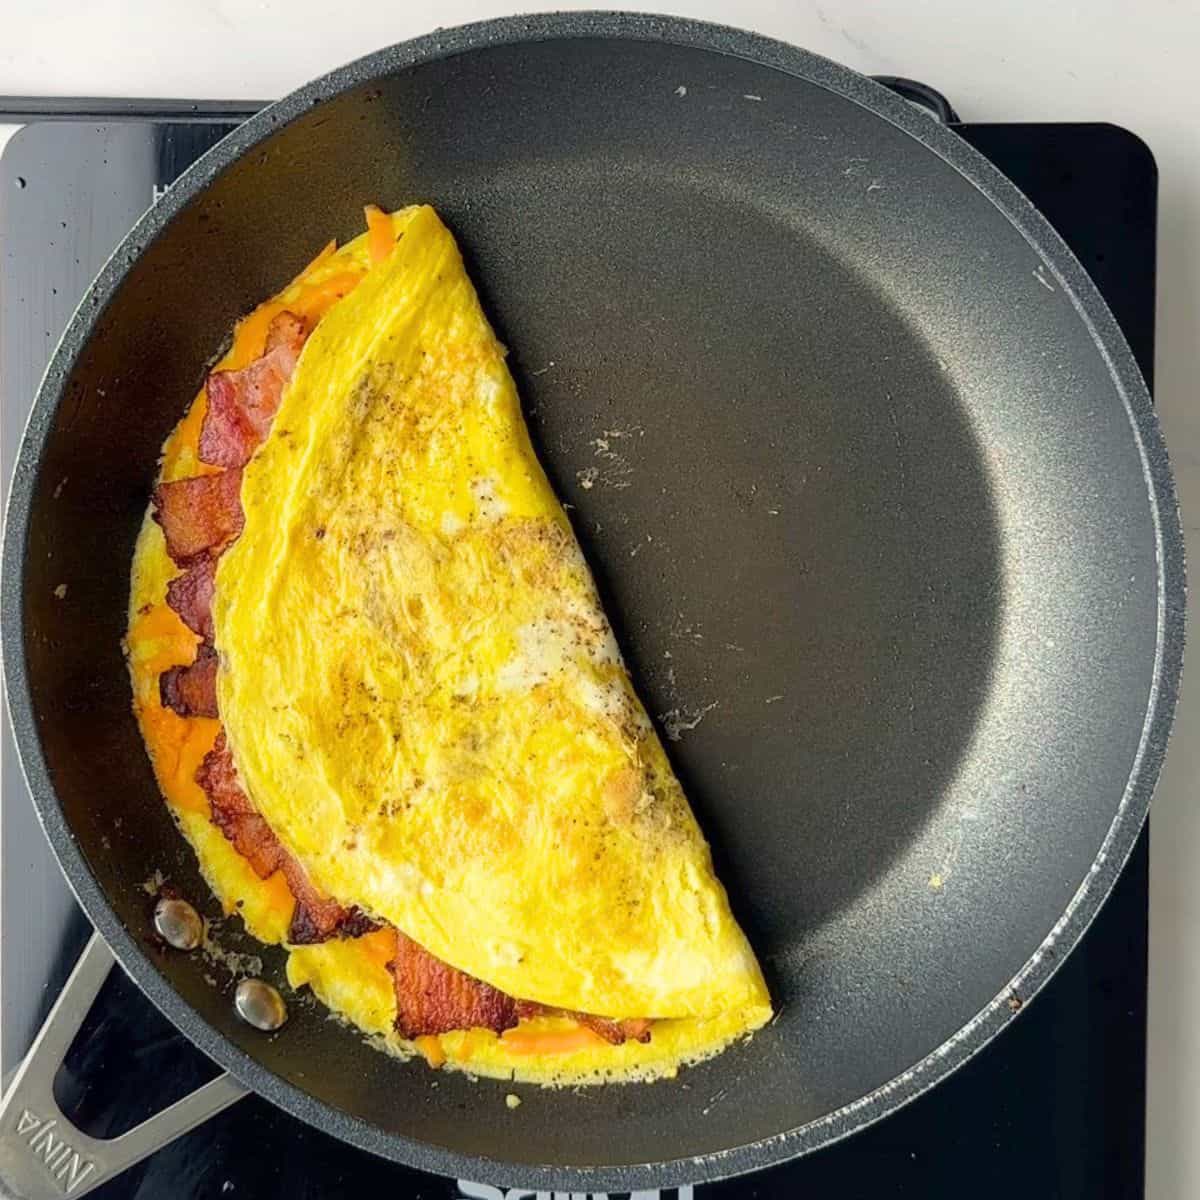 A folded omelette in a skillet.